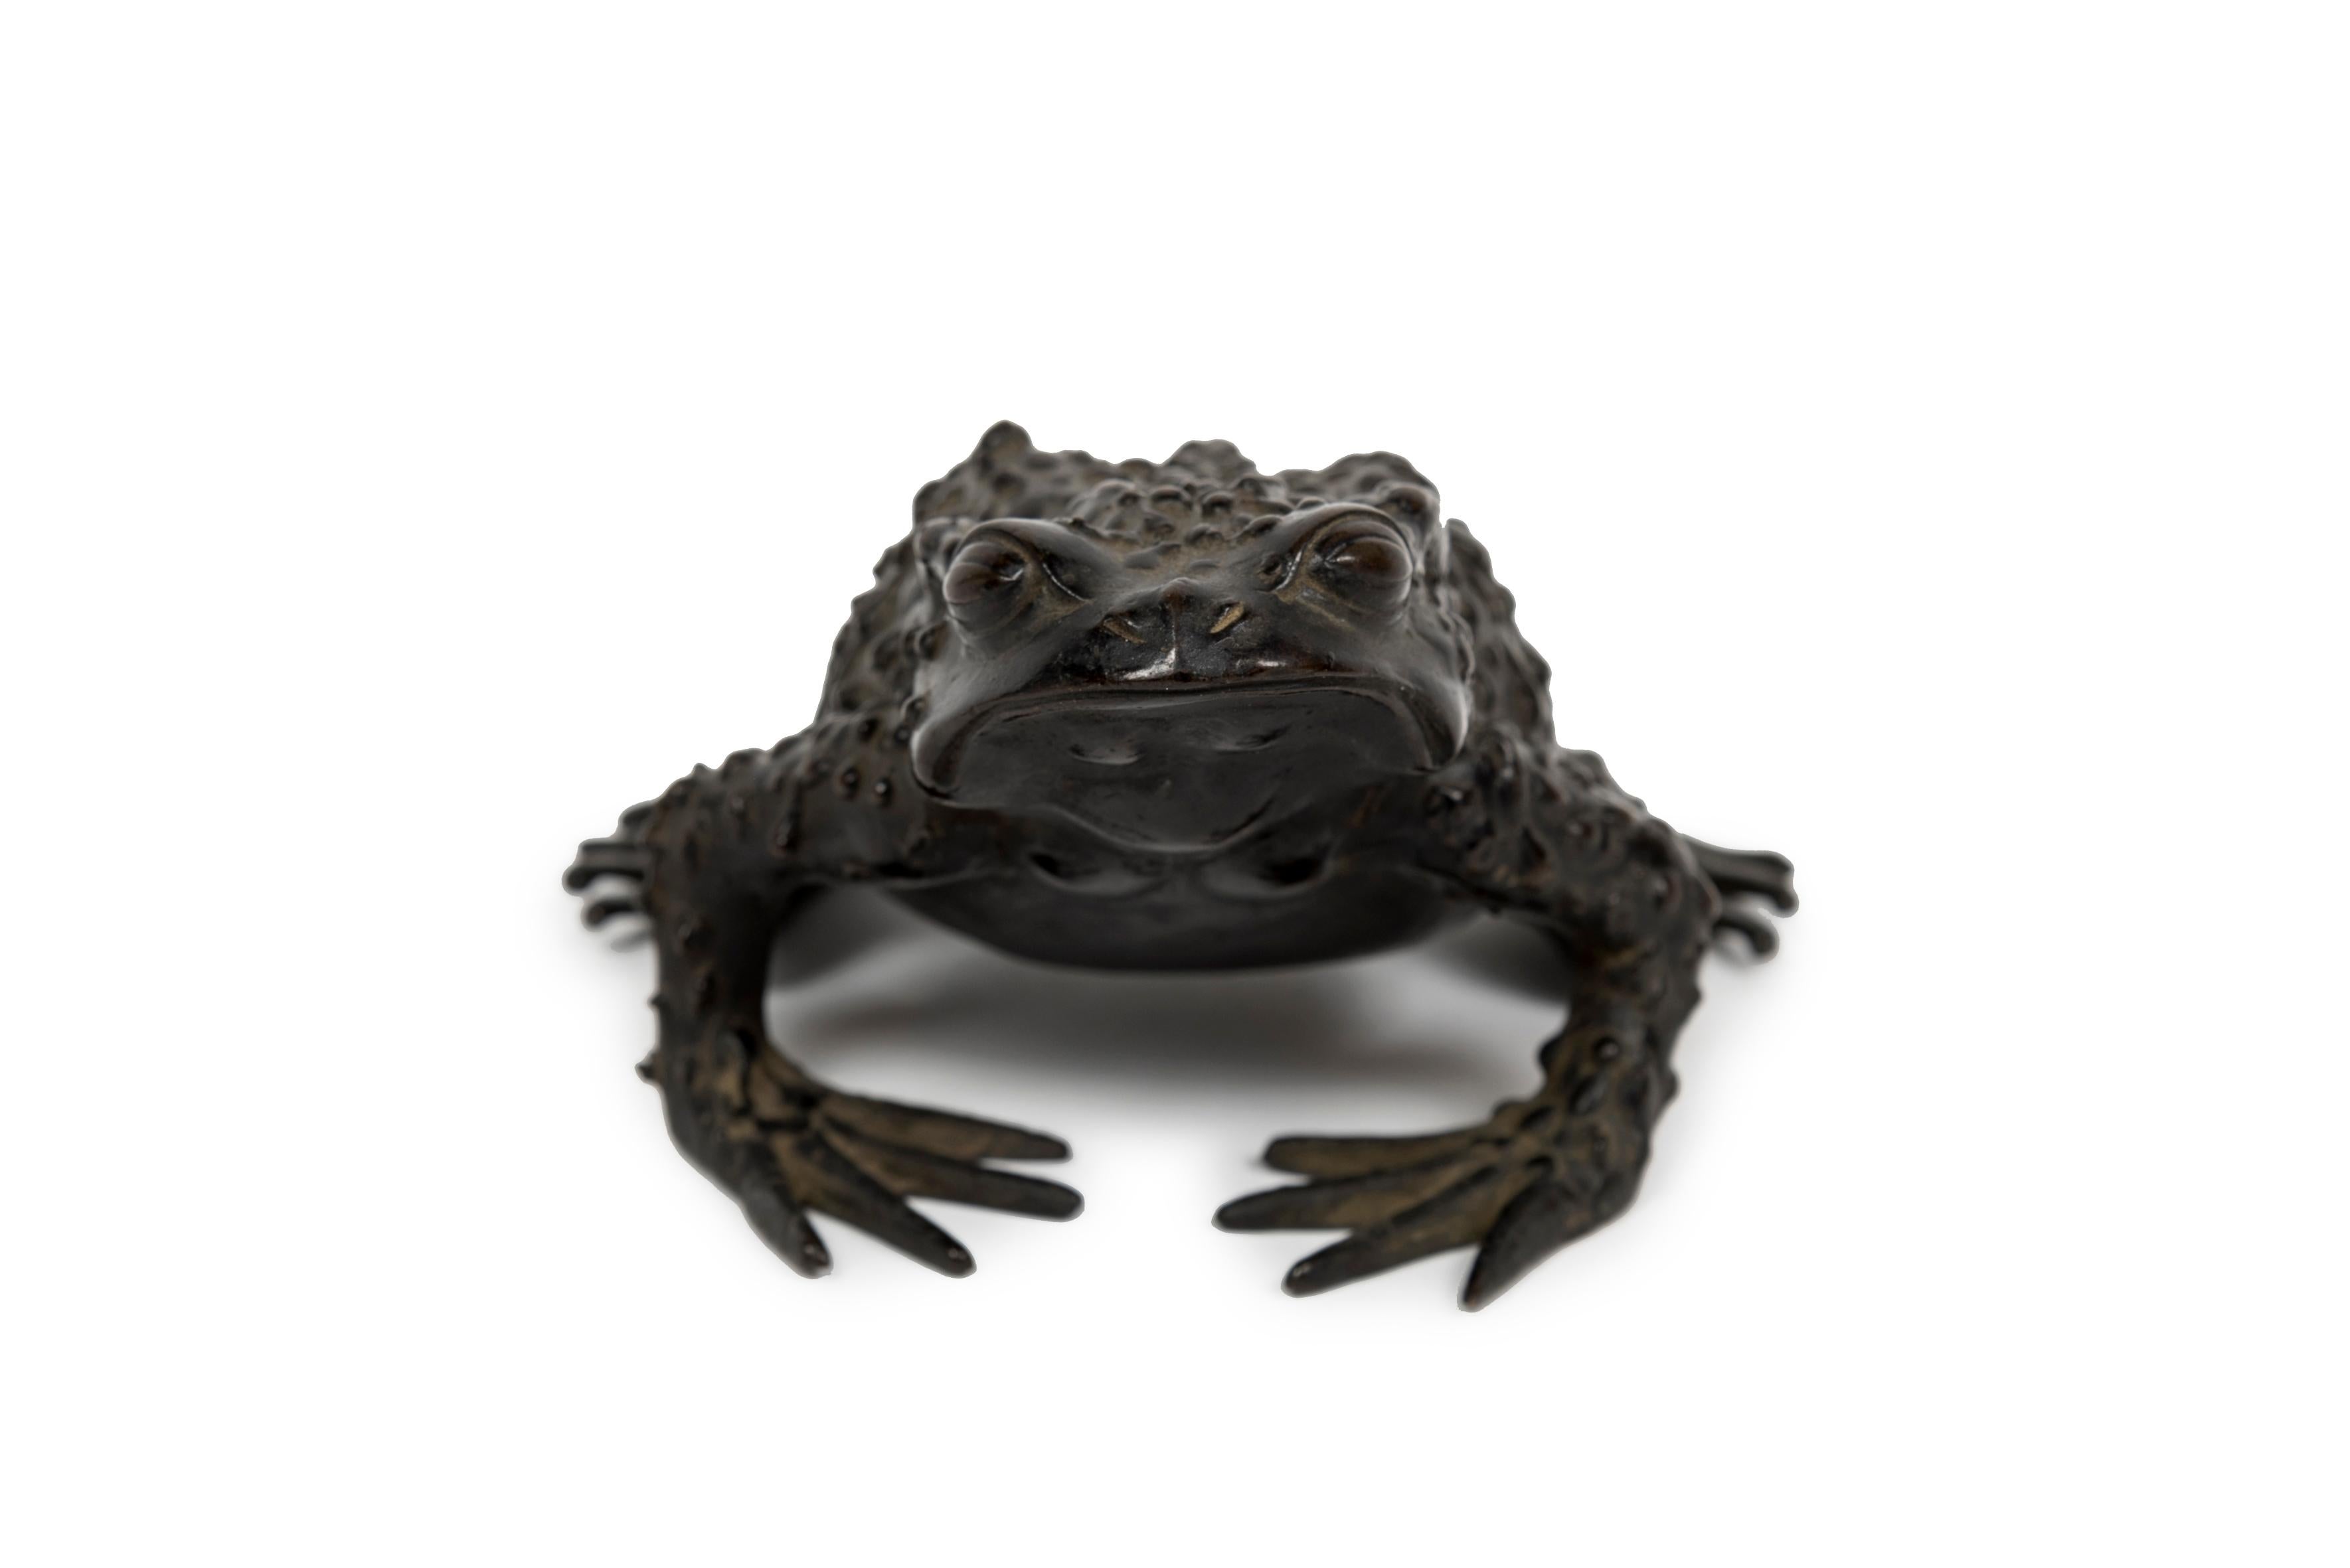 Okimono bronze sculpture of a toad. 
The toad or the frog (kaeru) is associated with good luck and wealth. Kaeru means both “toad” or “frog” and “to return home” in Japanese. This meaning is due to the toad’s ability to return each year to the pond